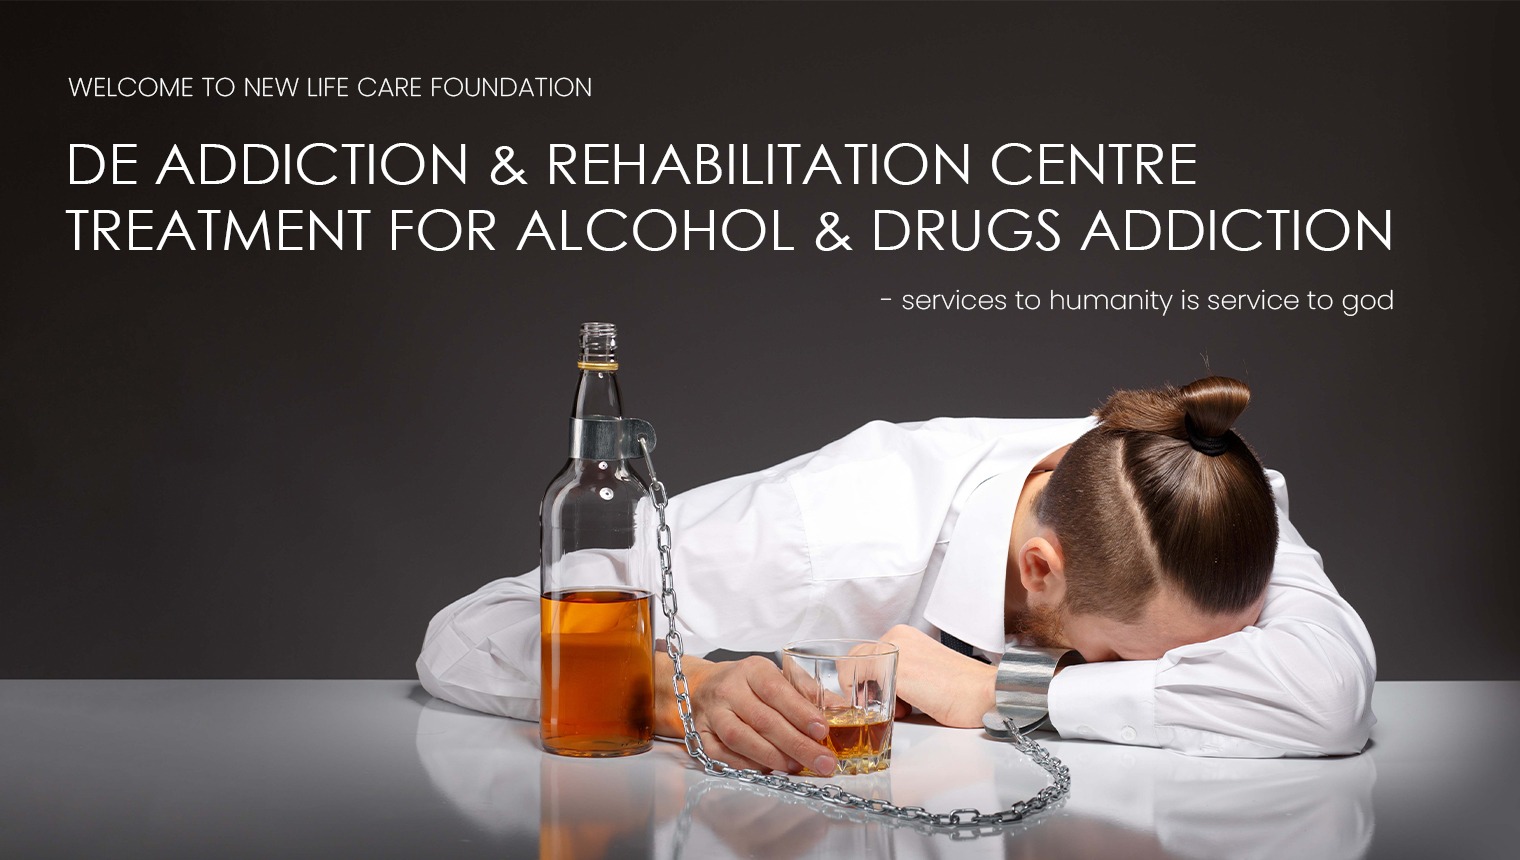 Best Rehabilitation and De Addiction Centre For Drug Addicts and Alcohol in Thane Mumbai 